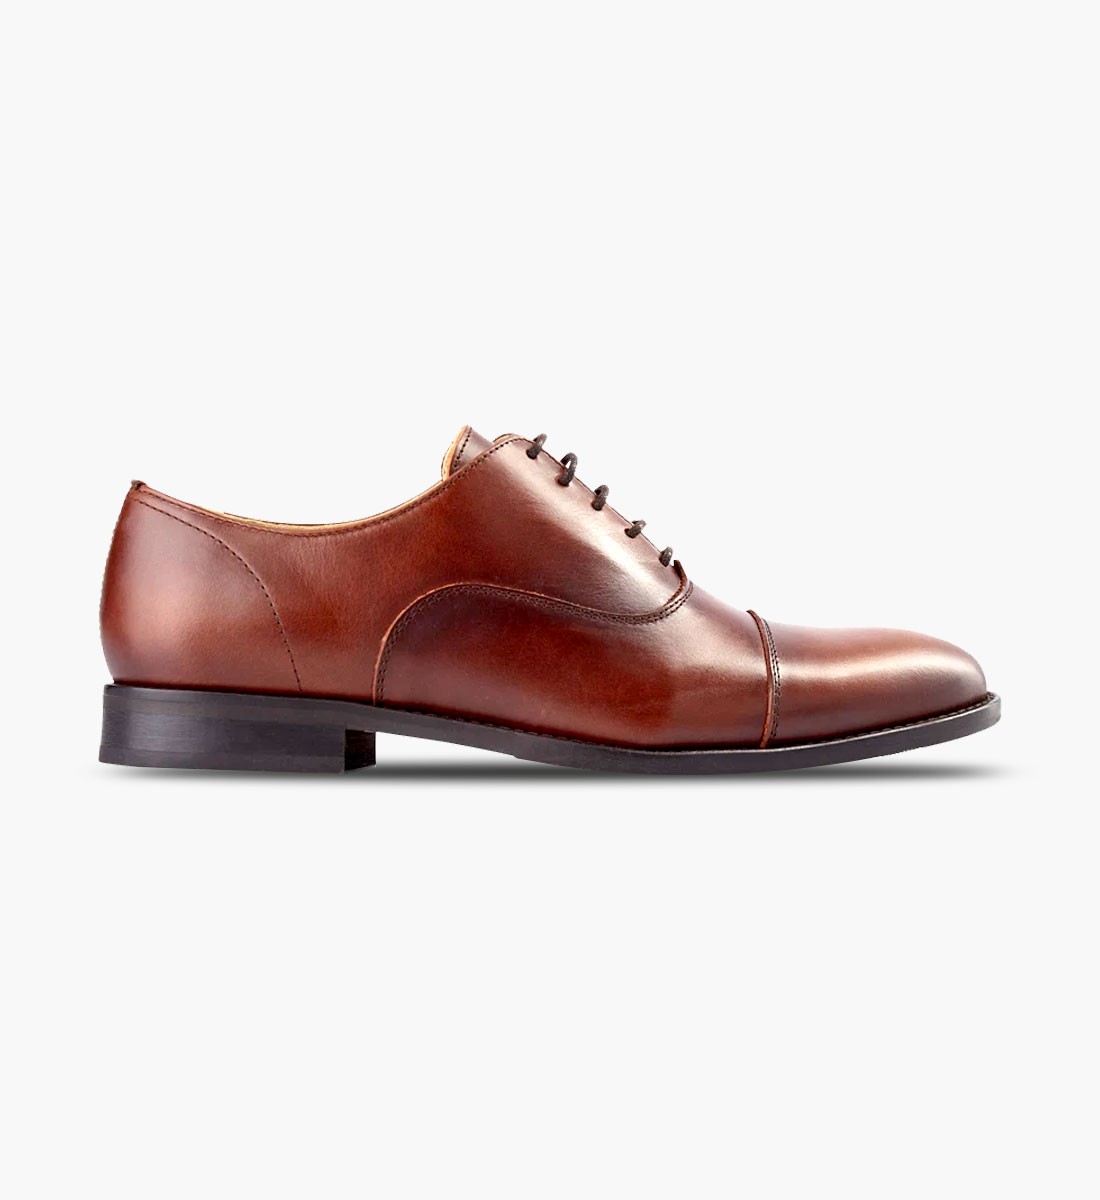 Classic Leather Shoe